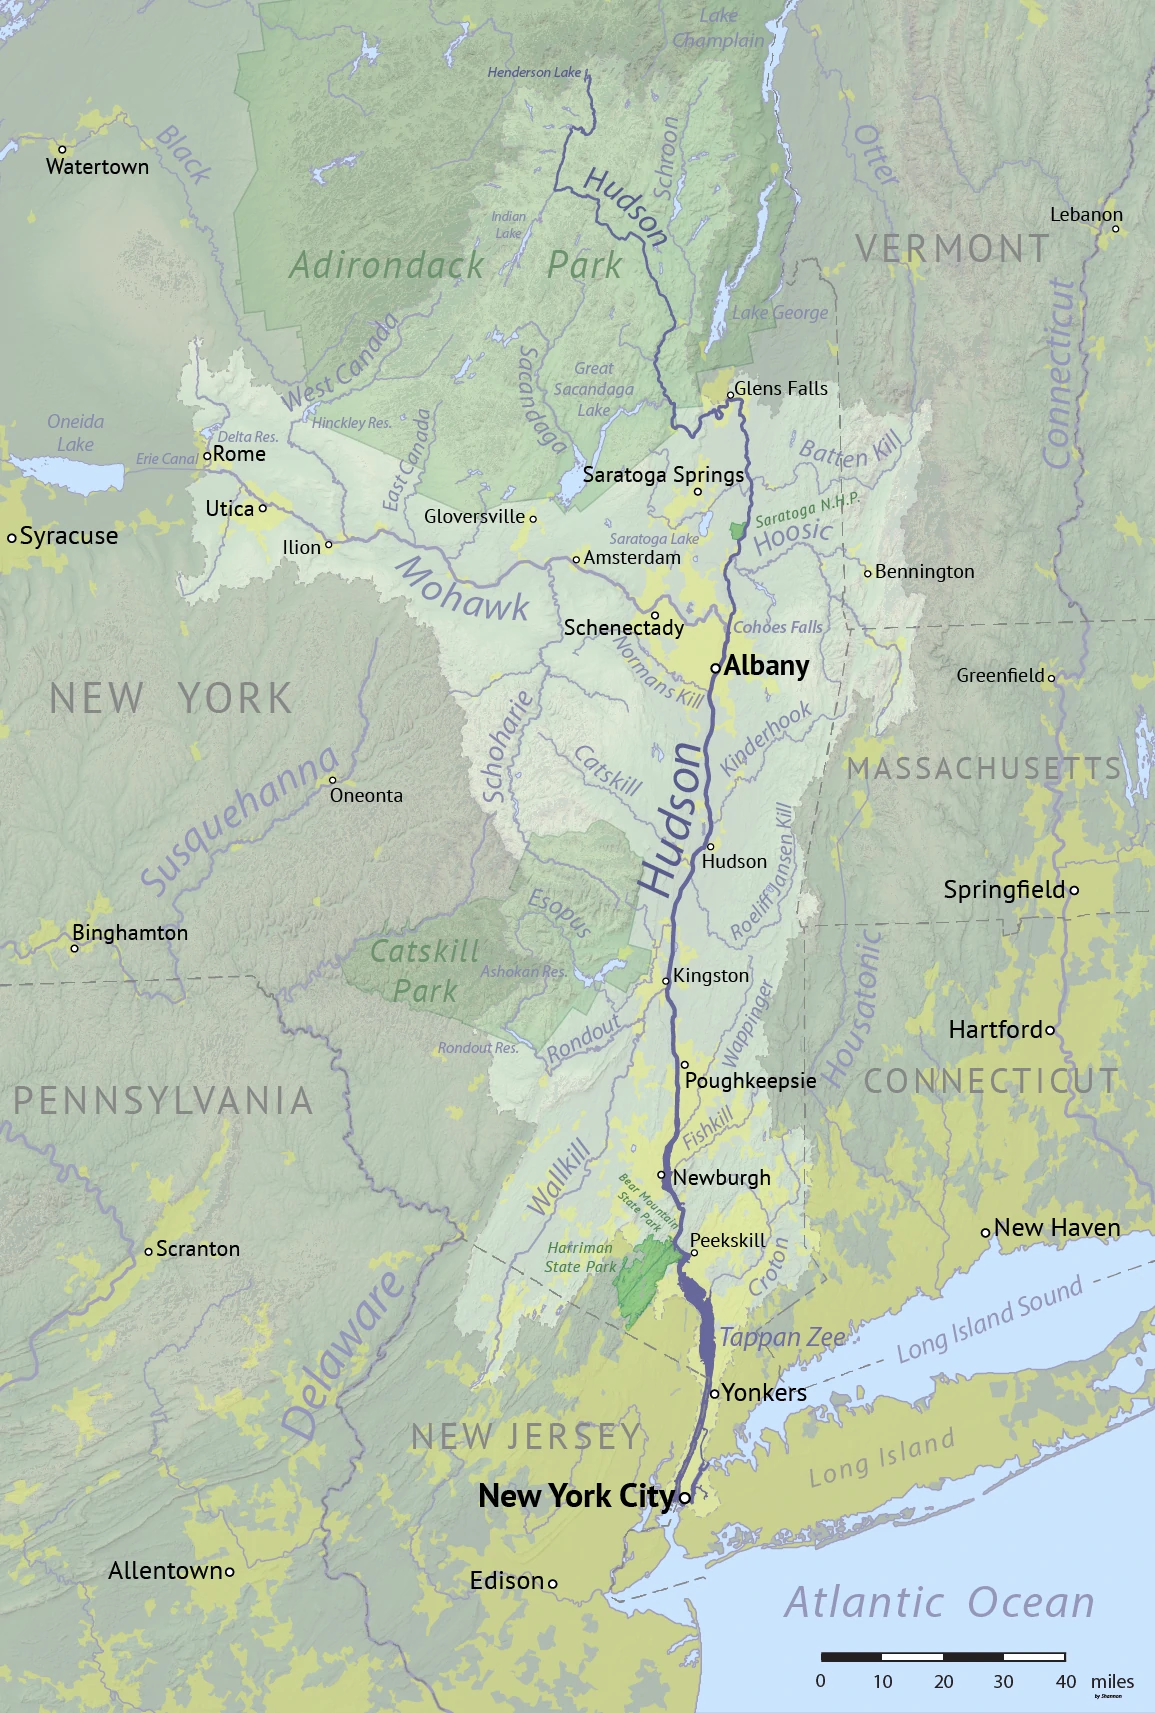 A topograpic map of the Hudson River Basin with the river and large tributaries labeled.